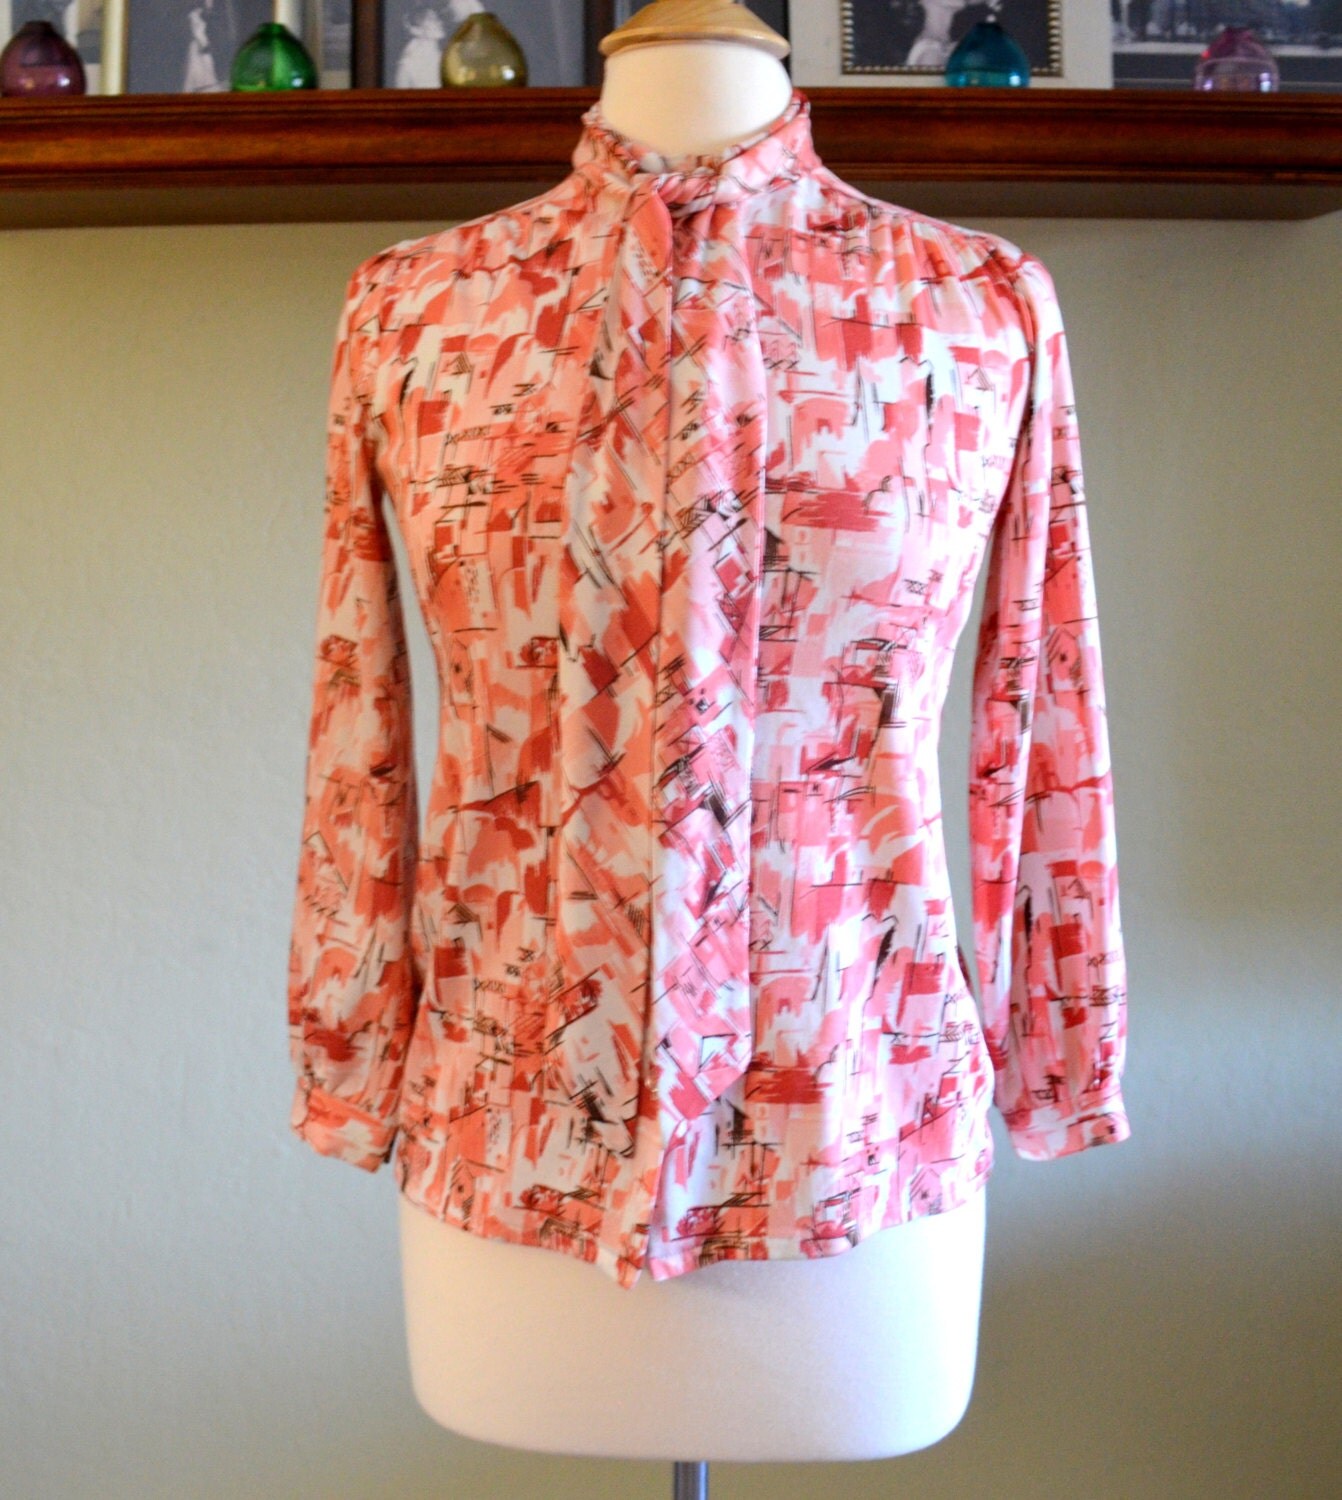 Vintage Knit Button Down Blouse with Neck Tie by UpswingVintage